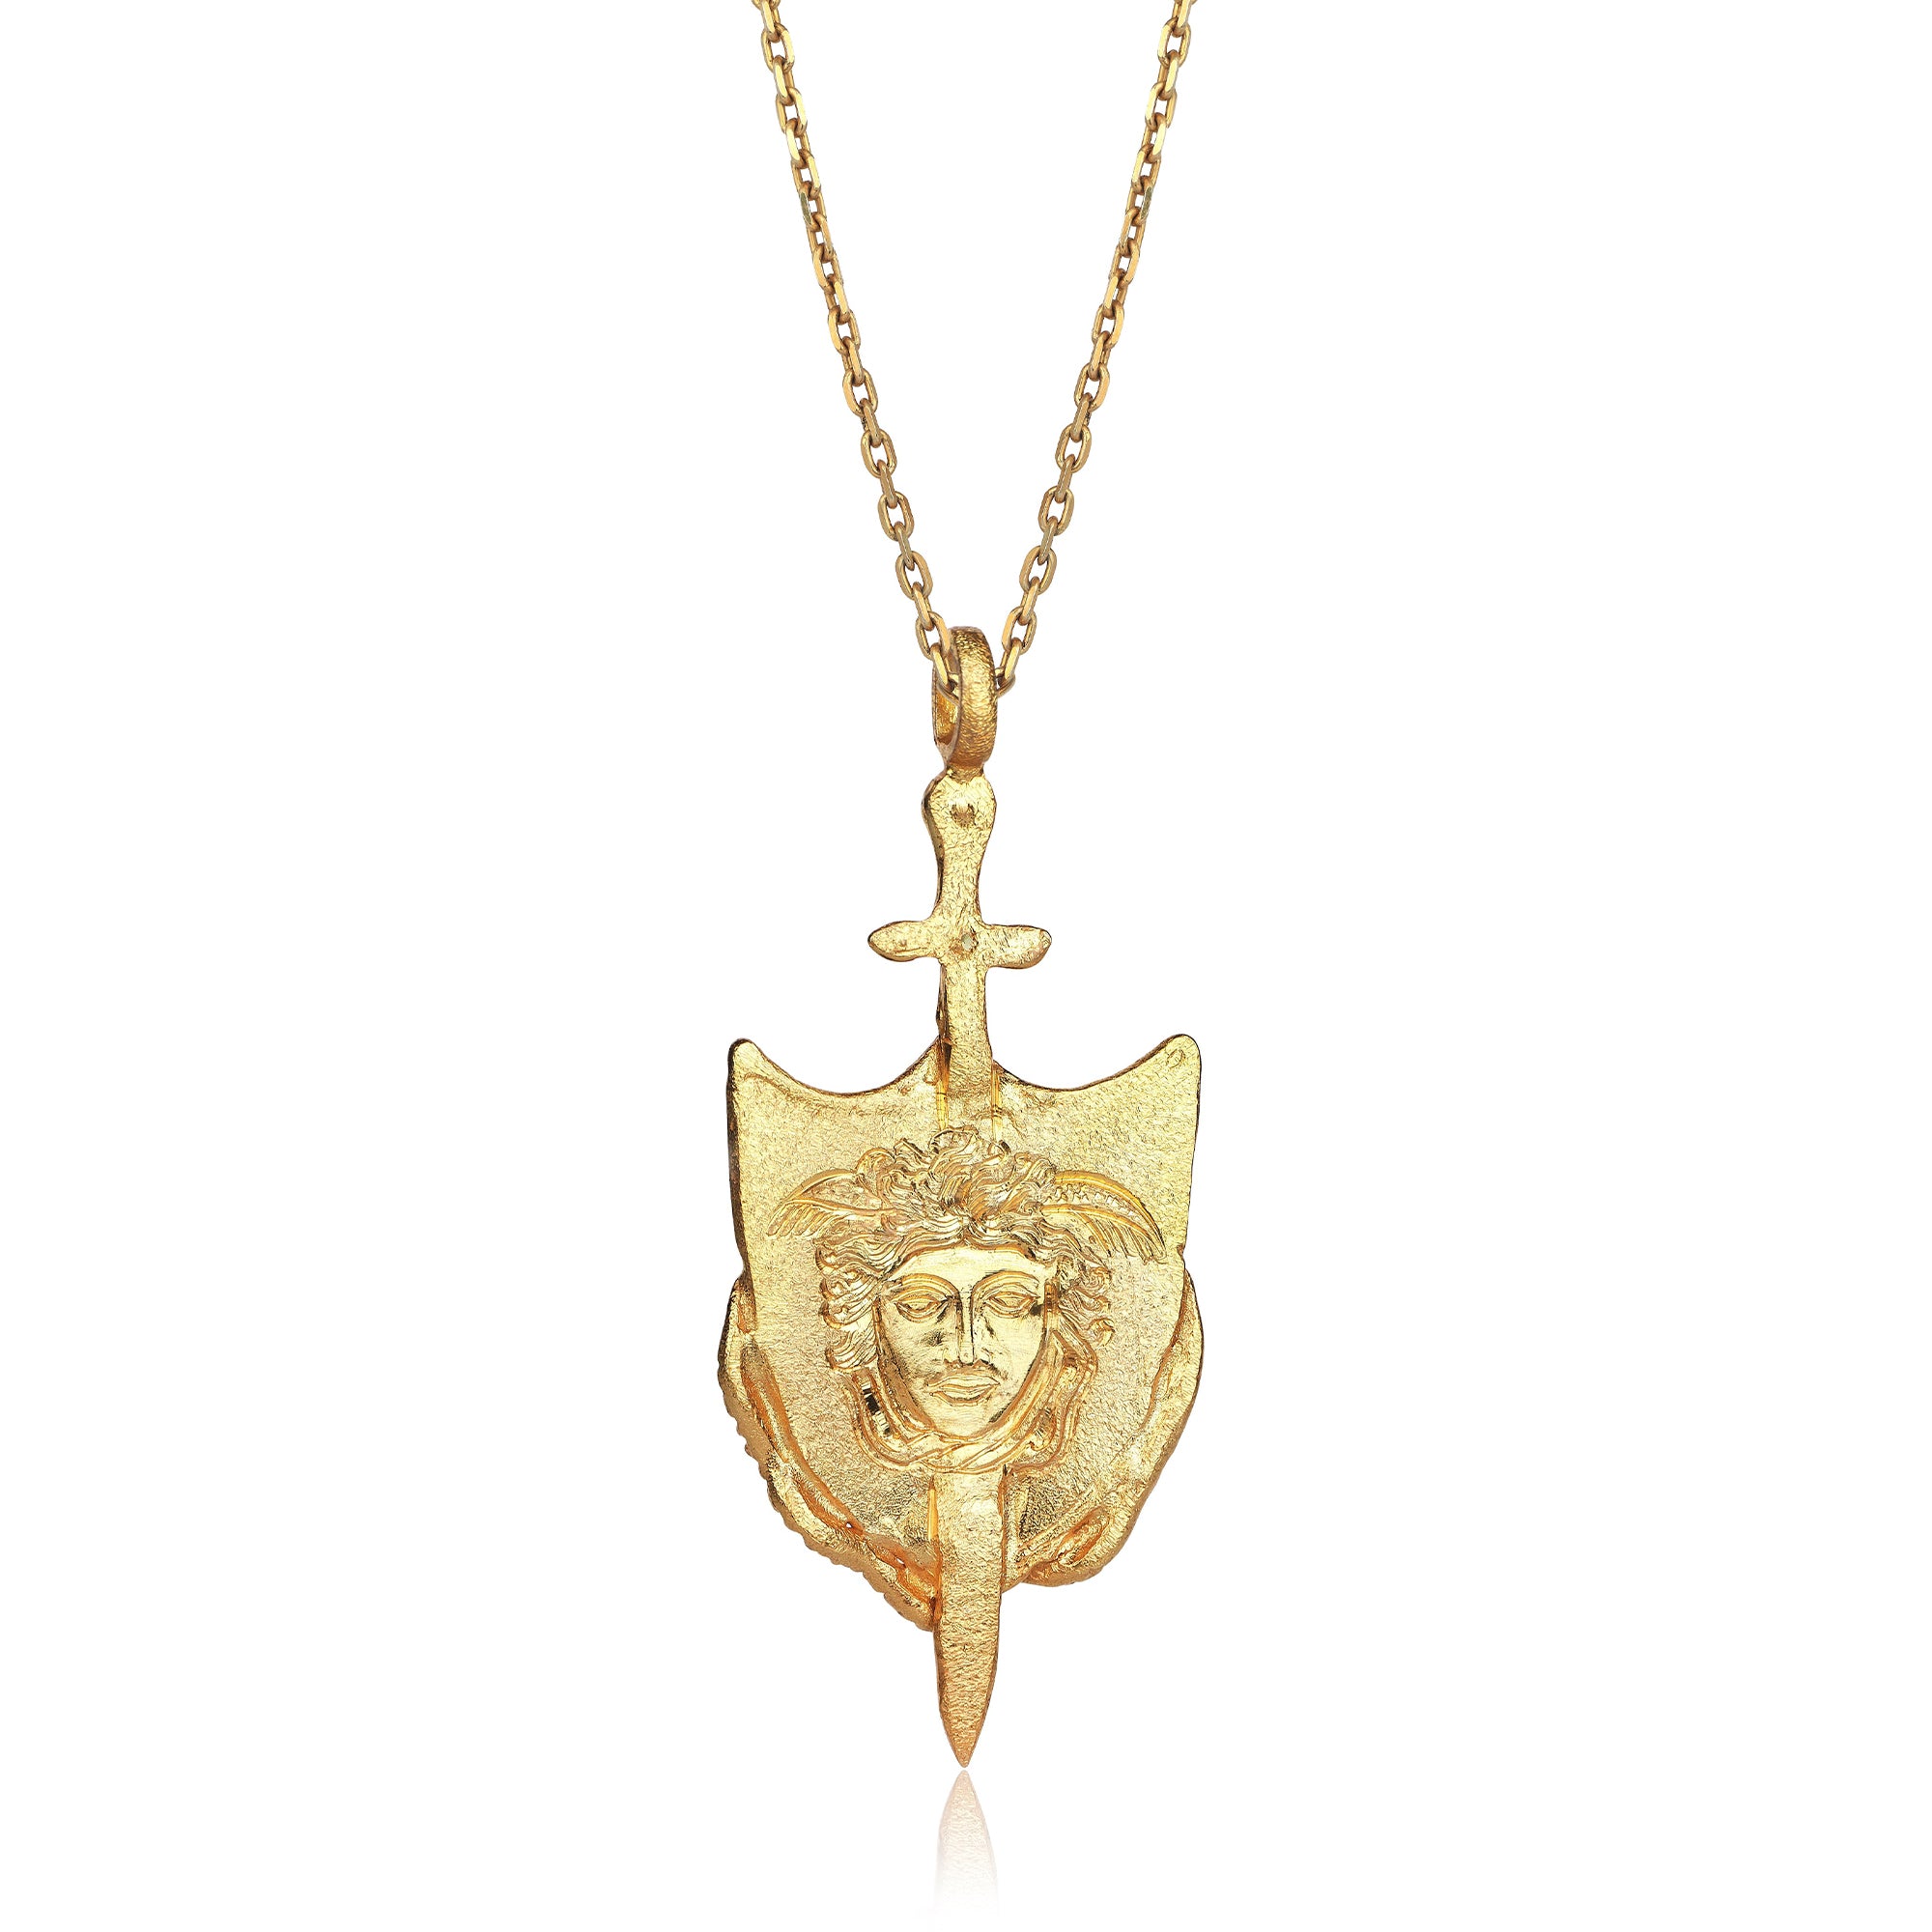 THE PERSEUS NECKLACE